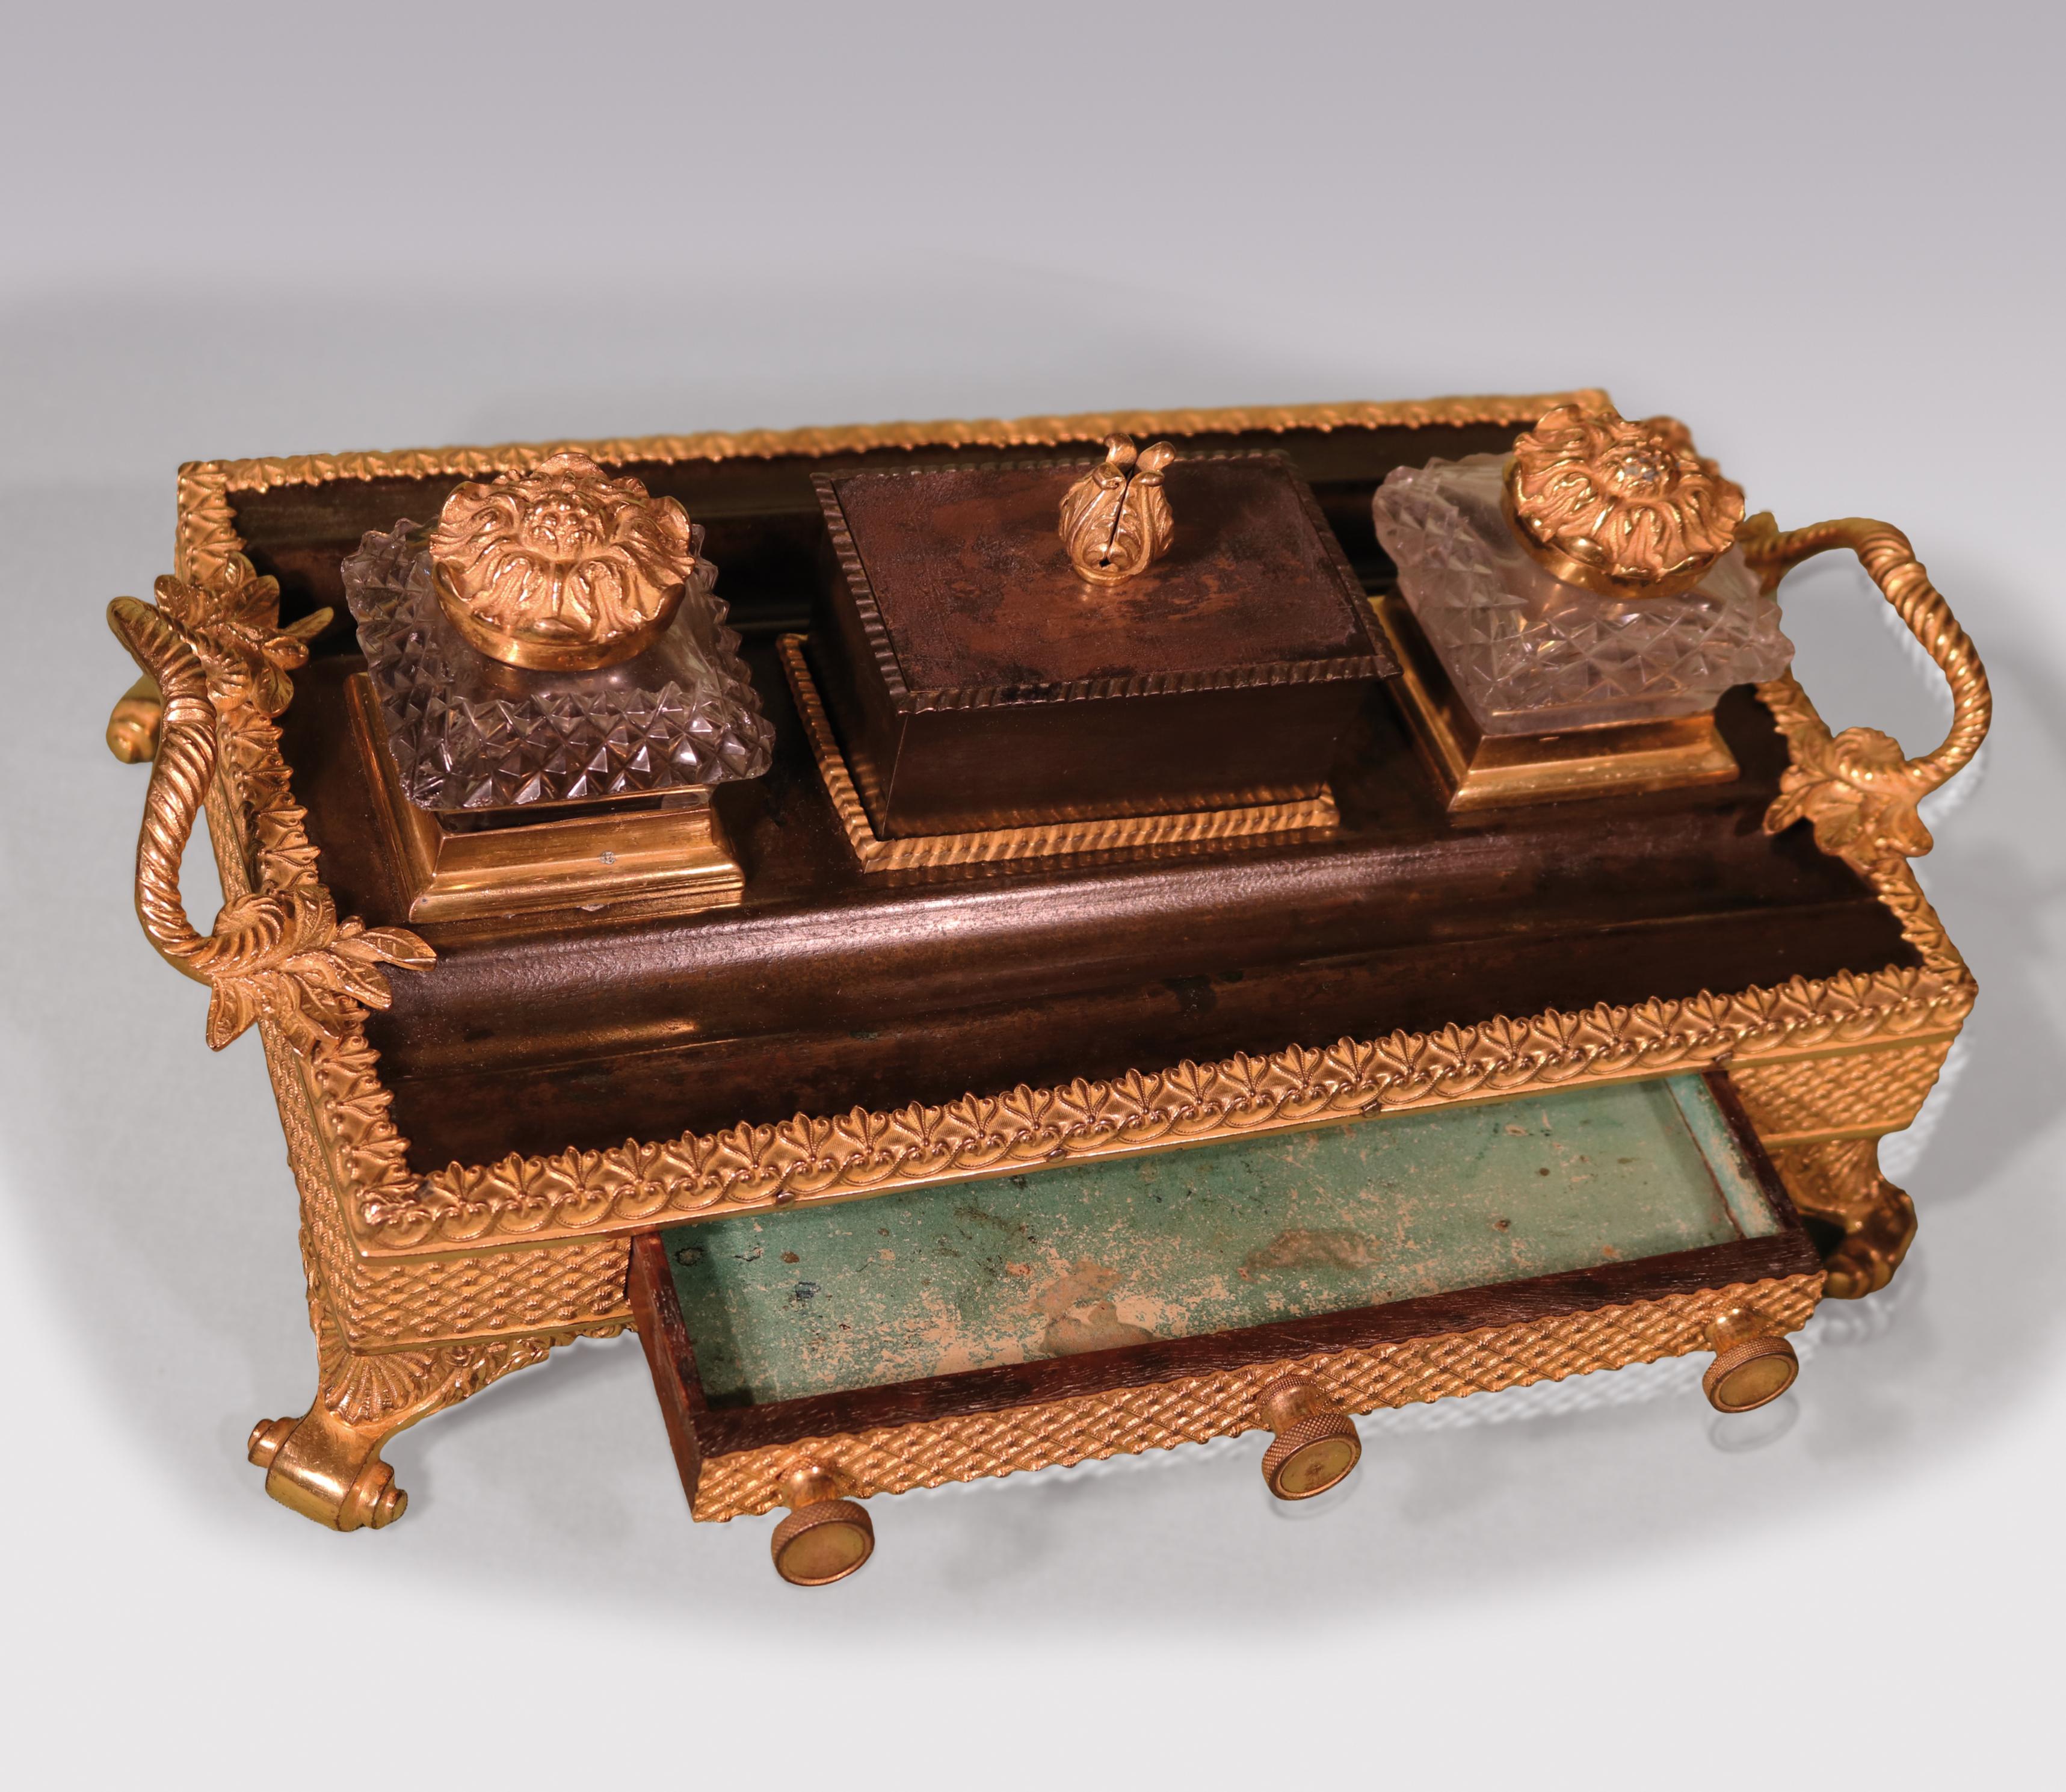 An early 19th century Regency period bronze and ormolu Pentray with cut glass inkwells, having leaf & scroll handles above fret decorated frieze with central drawer, supported on shell scroll feet.